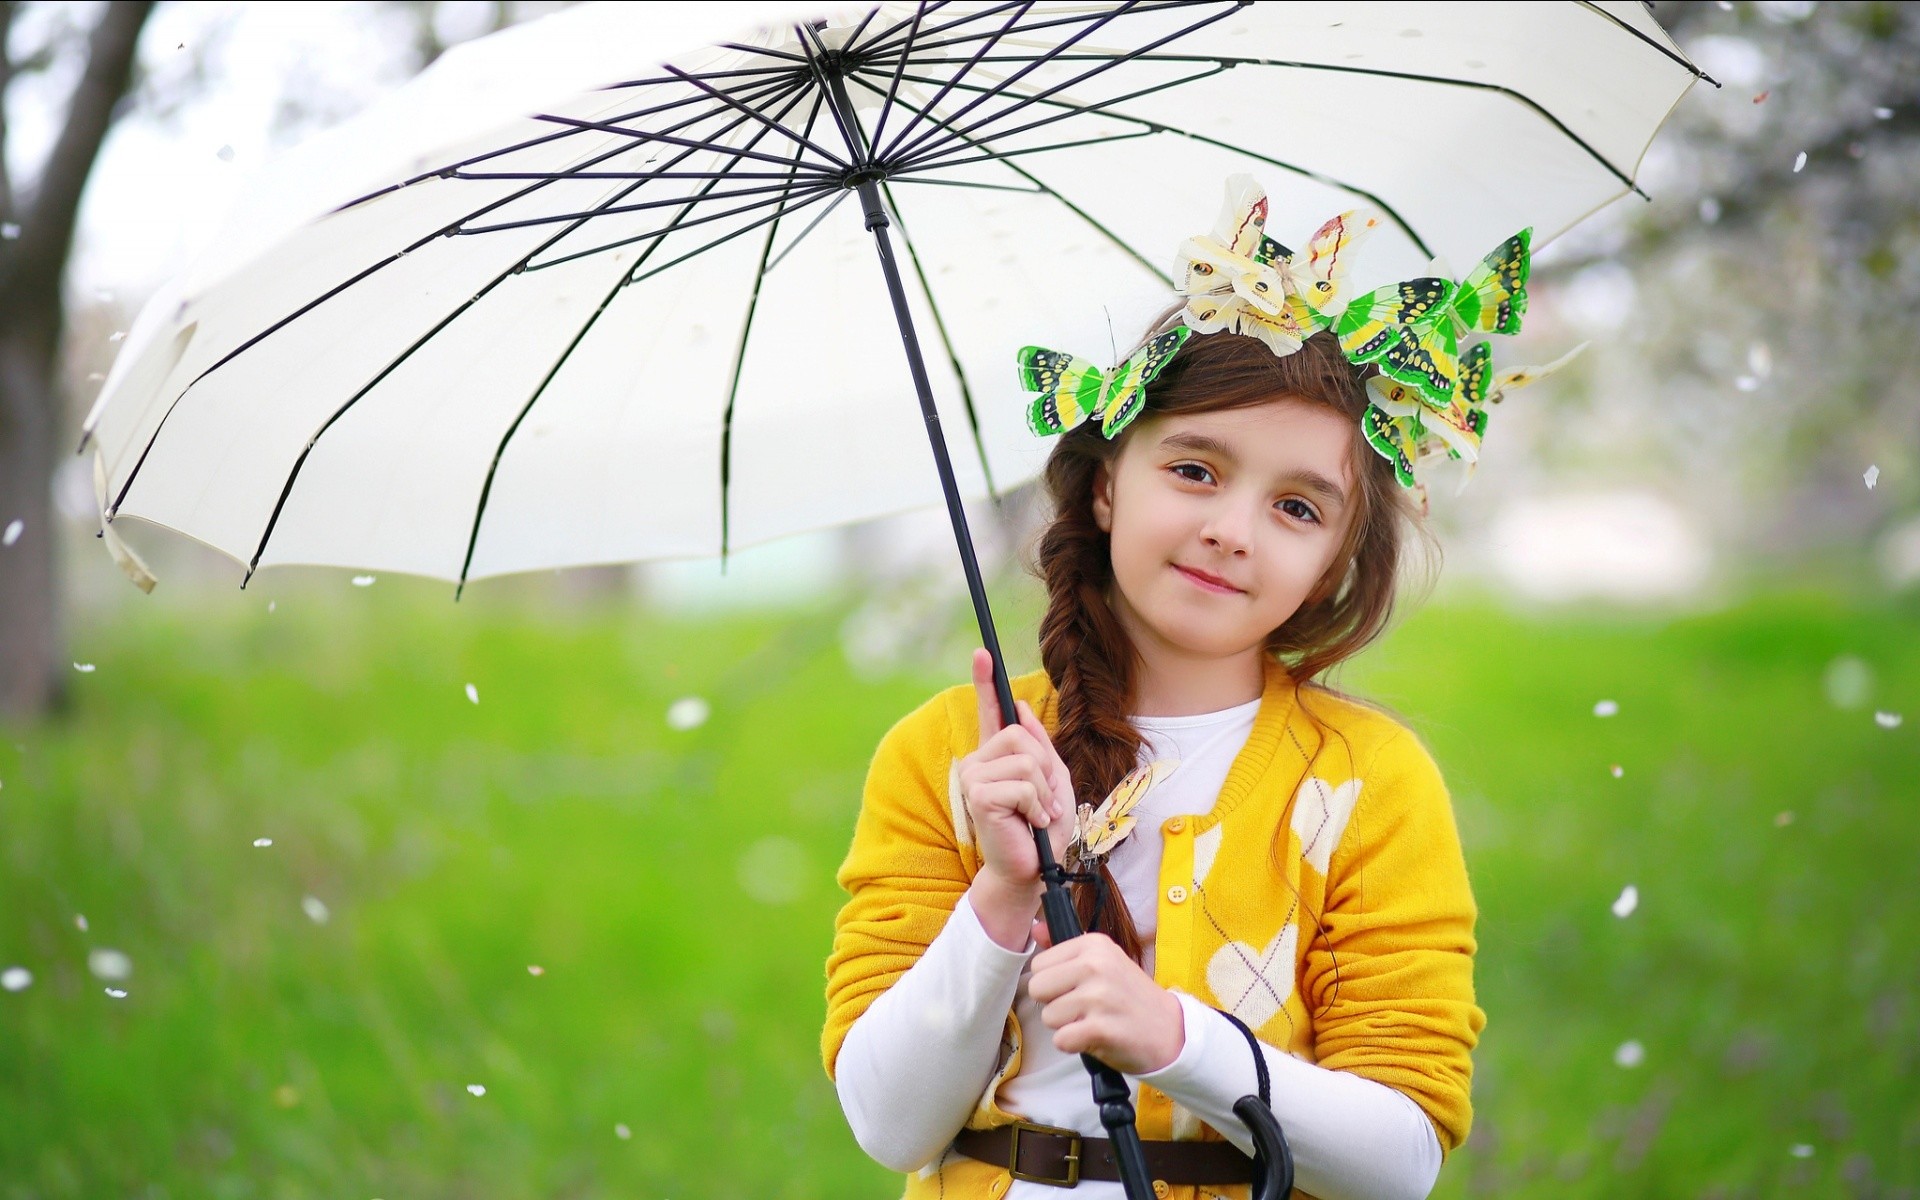 1920x1200 Find out: Cute Baby Girl with White Umbrella wallpaper on http://hdpicorner